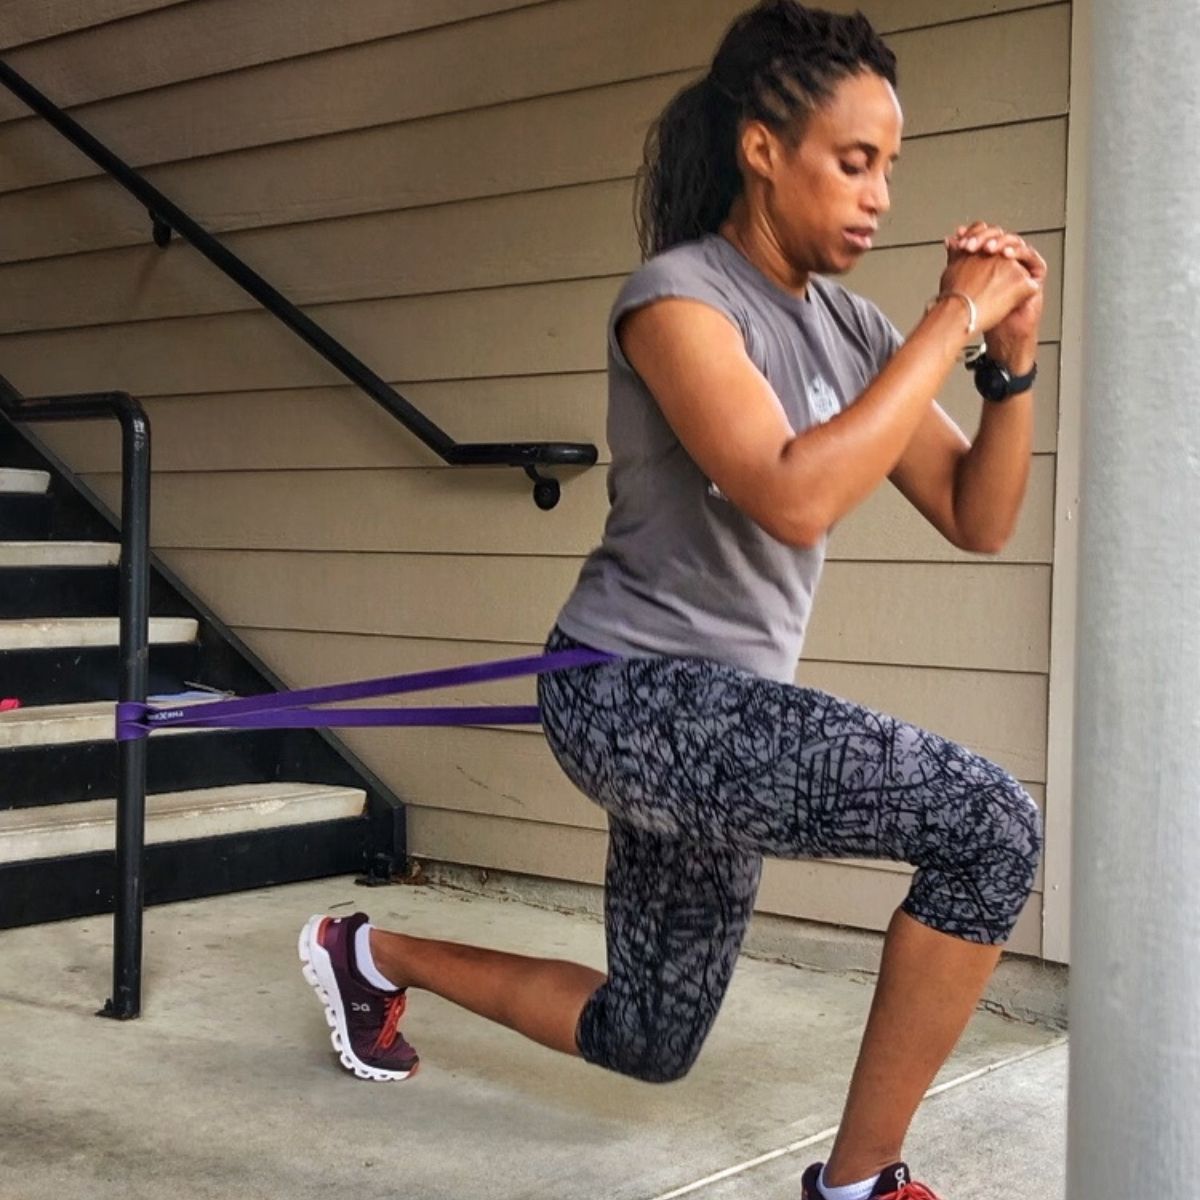 Exercises with resistance bands for glutes